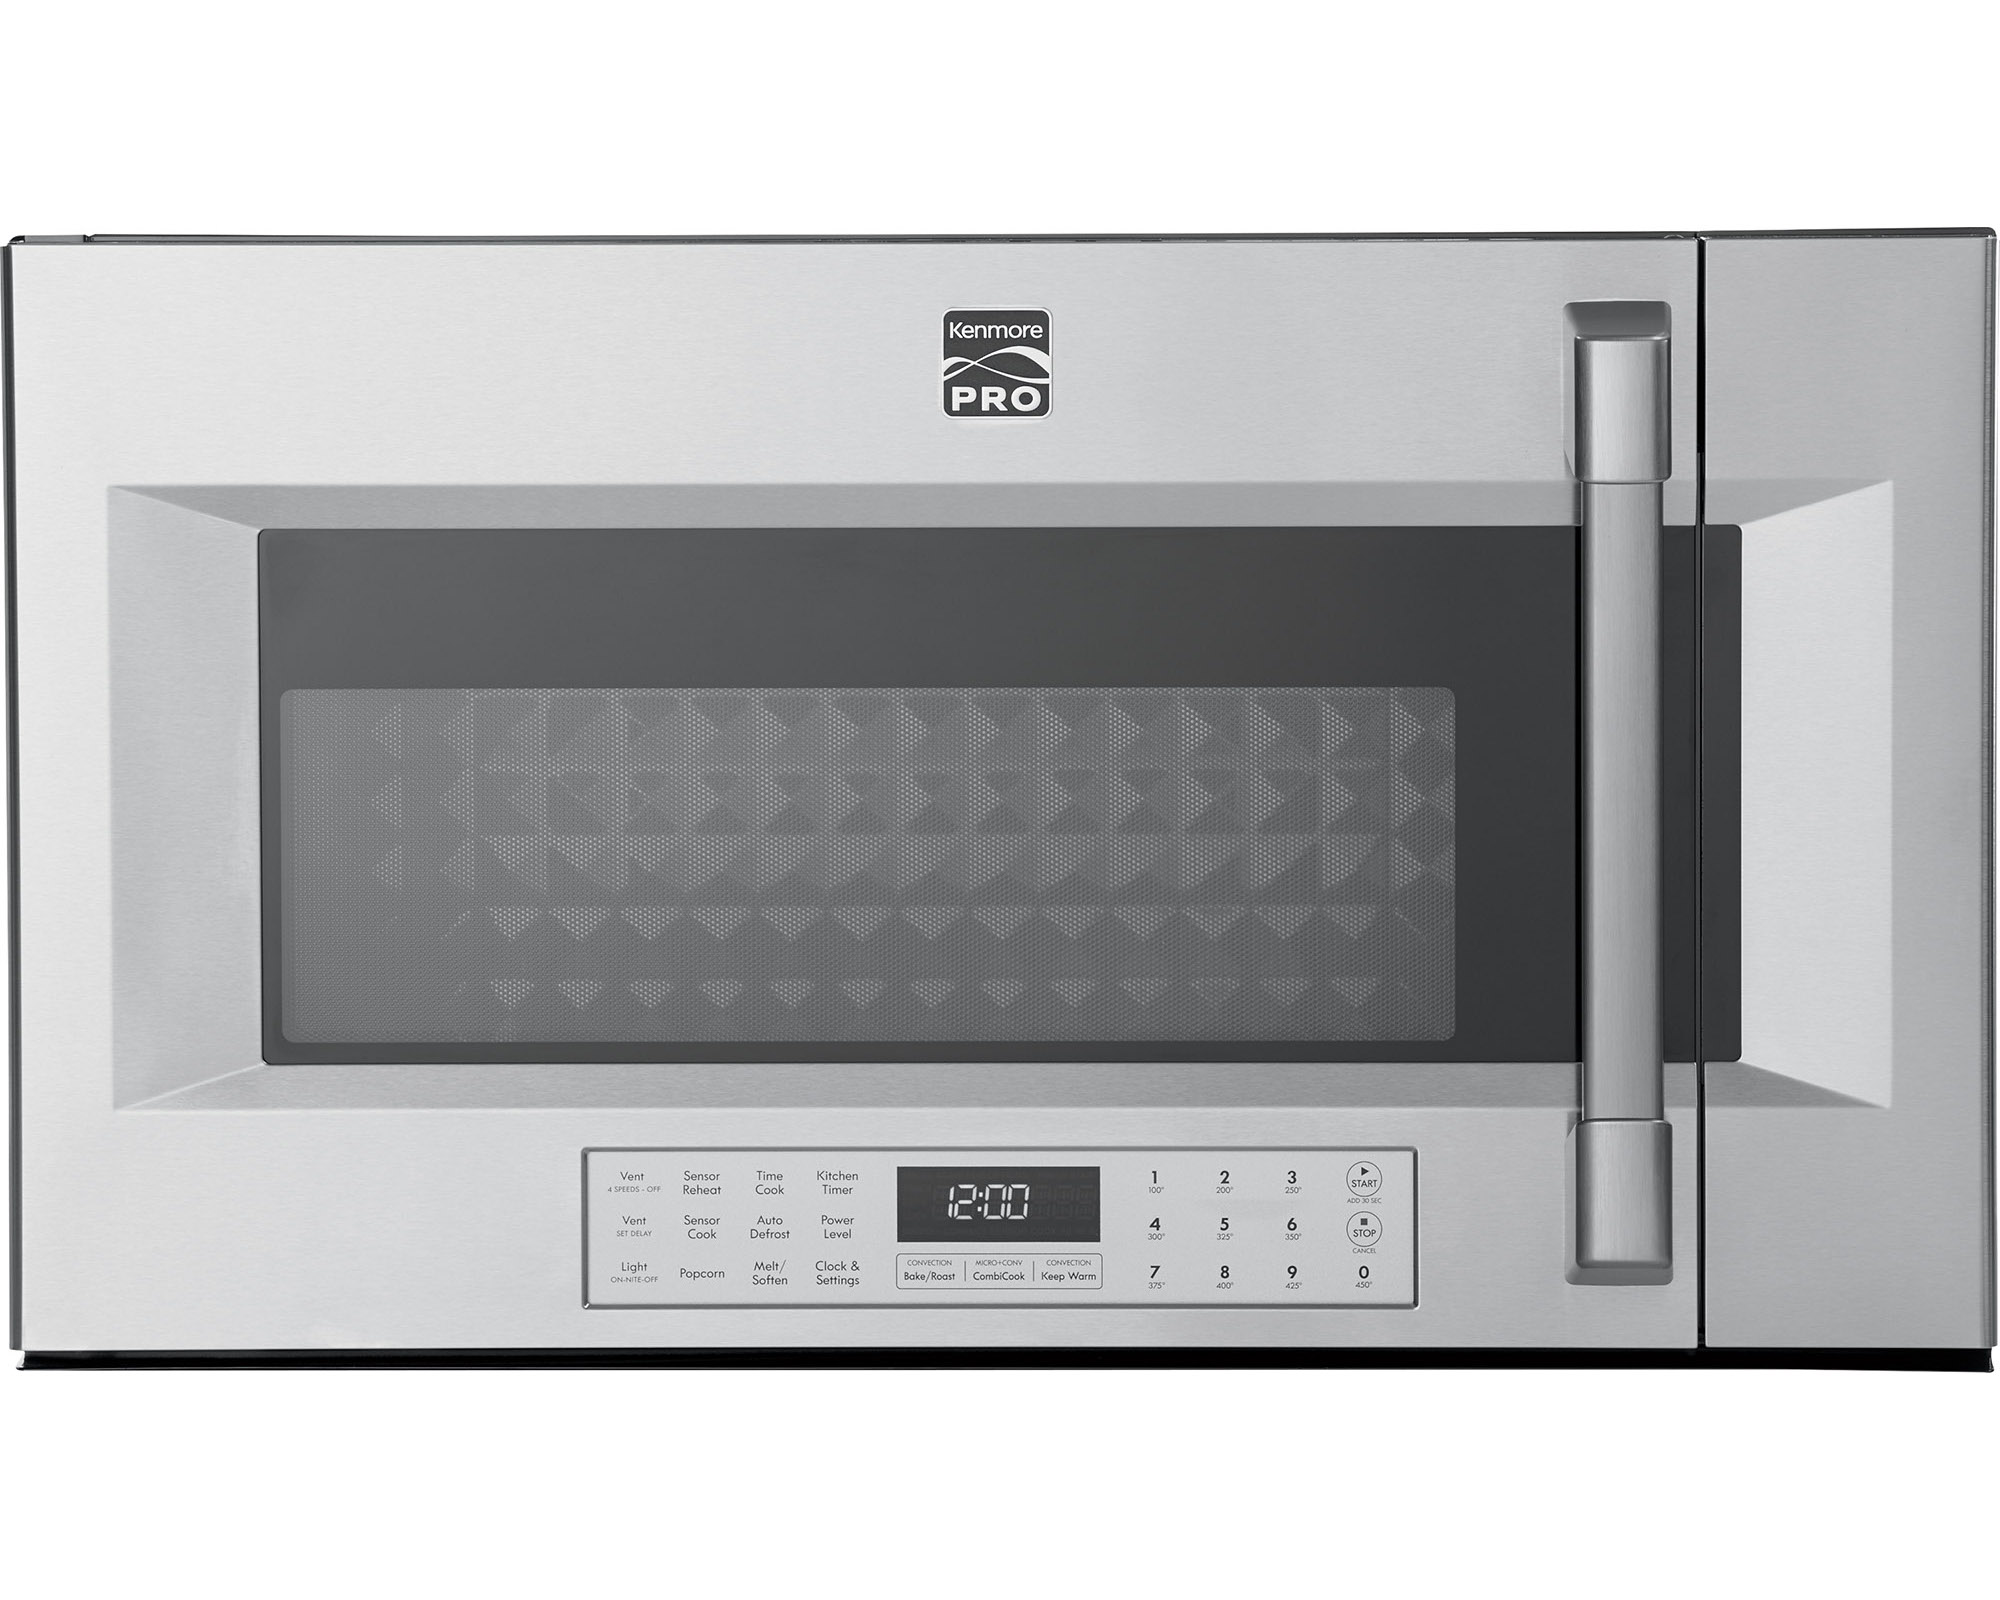 What Kenmore microwave is equivalent & size to my old model #721.